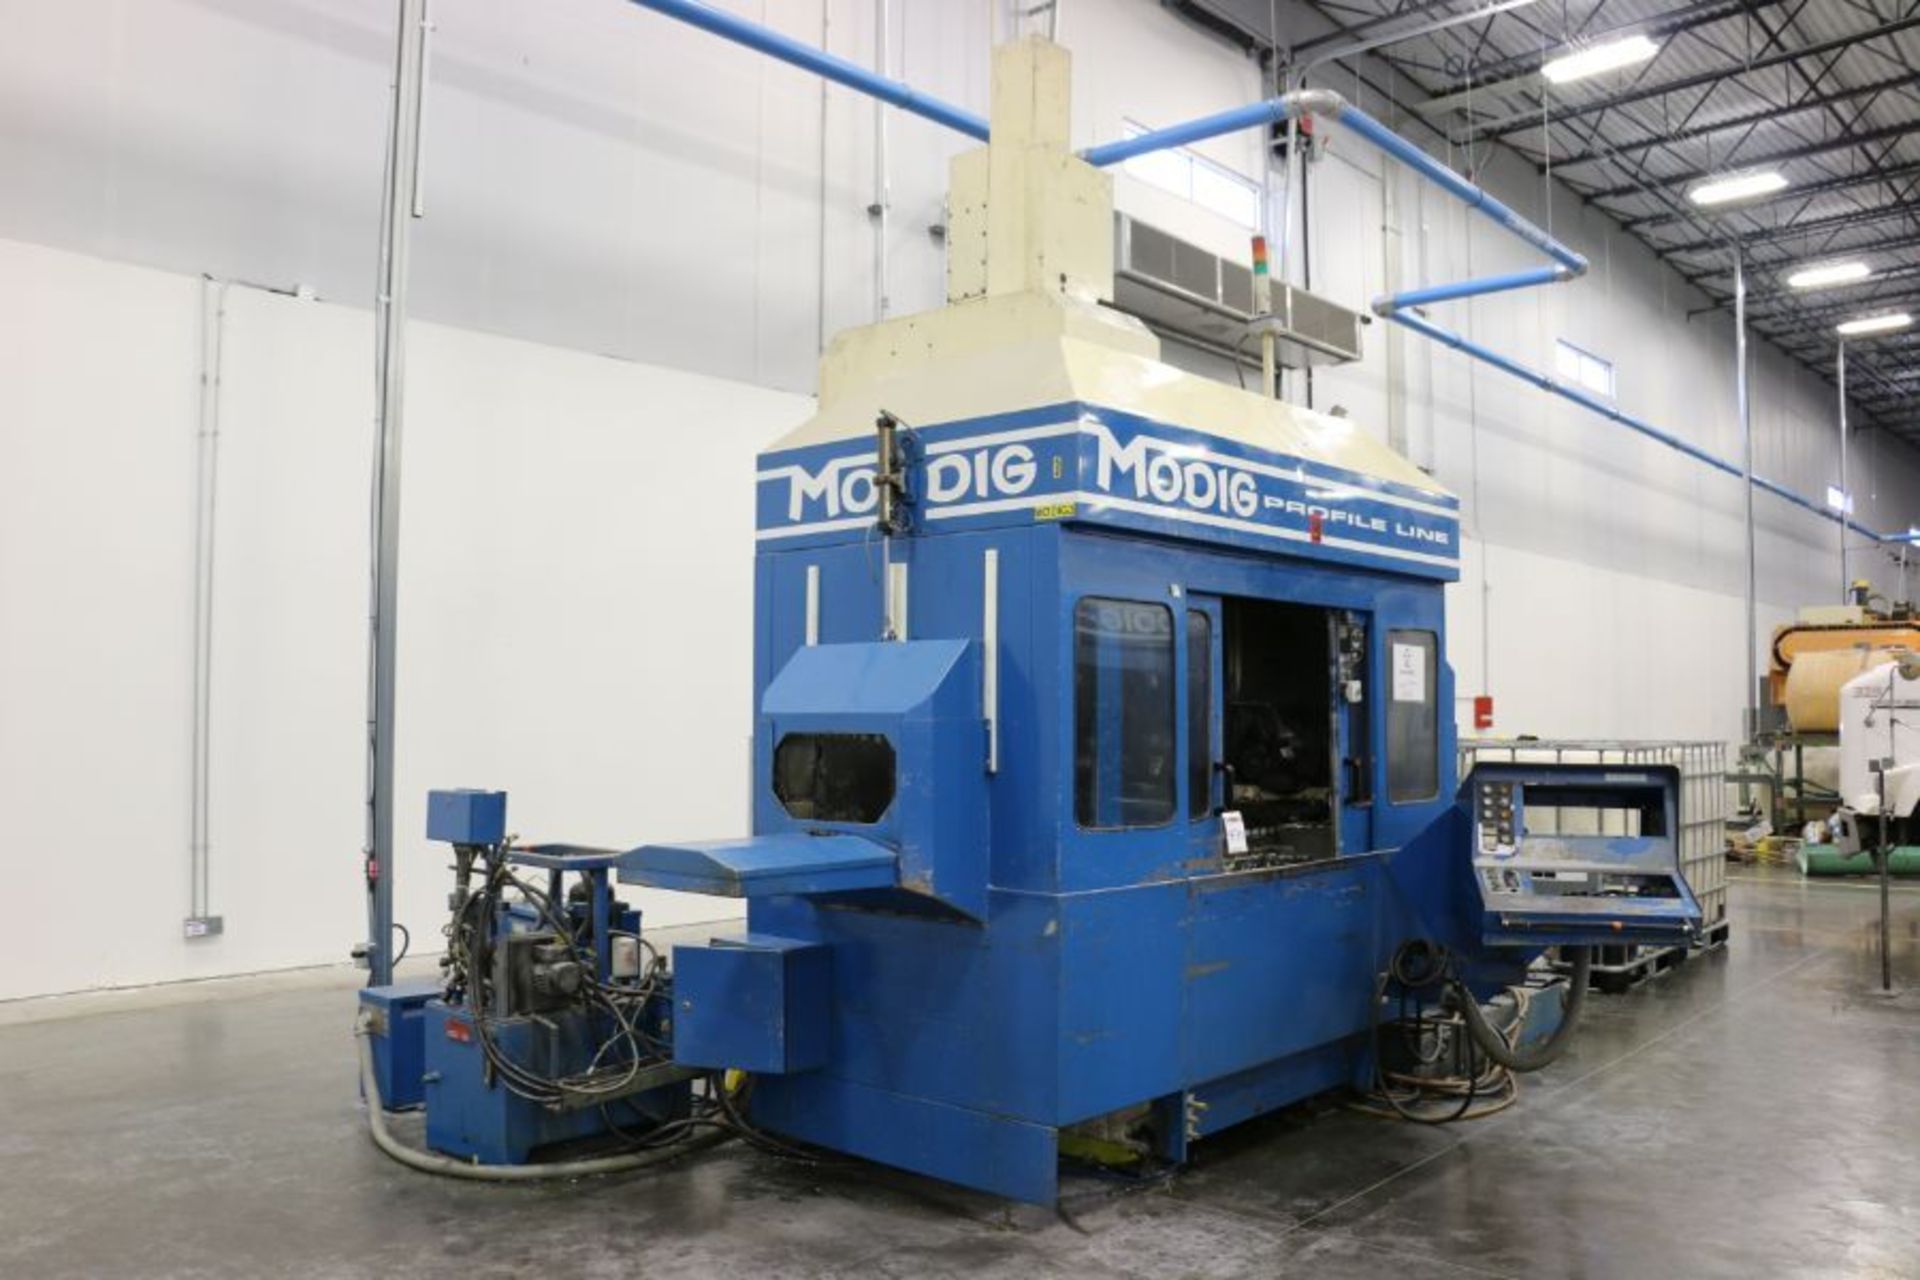 1997, Modig MD7200, Fanuc 16M Control, 20K RPM, 24 ATC, CT40, s/n 970328 *Parts Only Machine* - Image 2 of 8